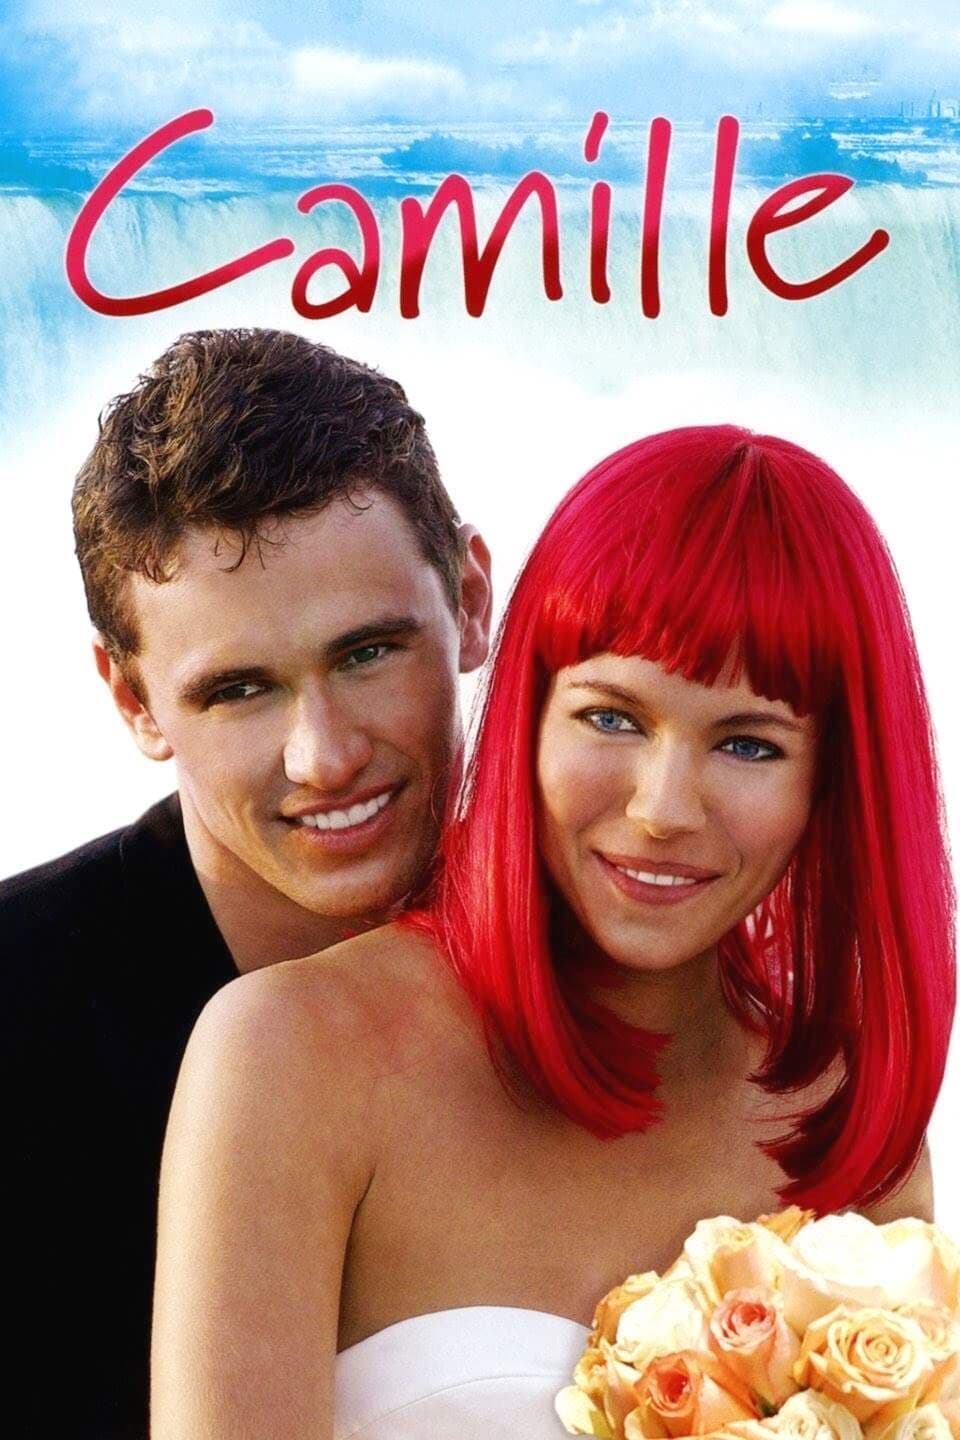 Camille [HD] (2007)